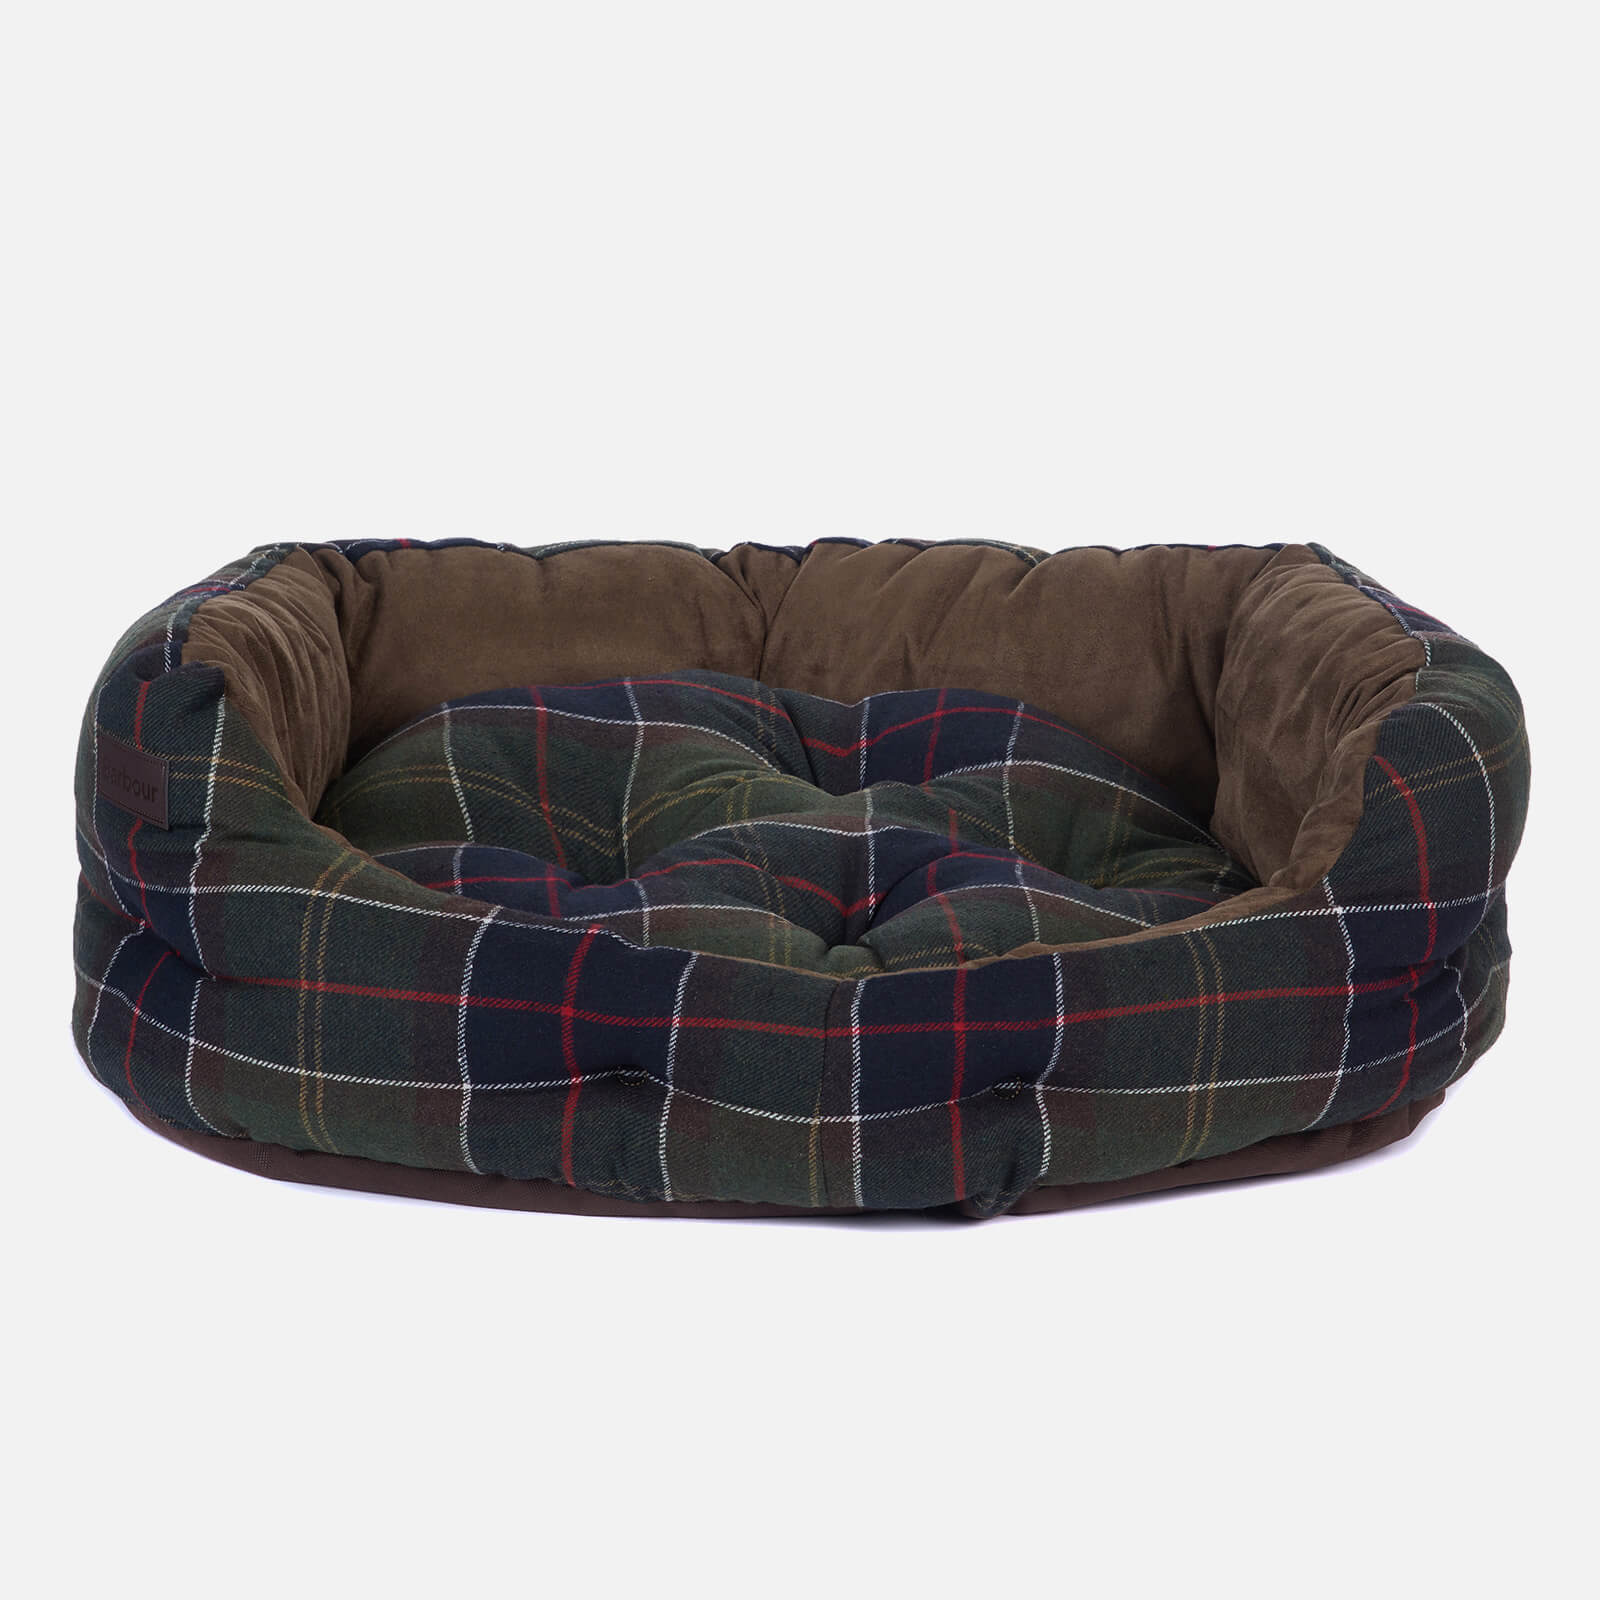 Barbour Dogs Luxury Bed - Classic Tartan - 30 inch